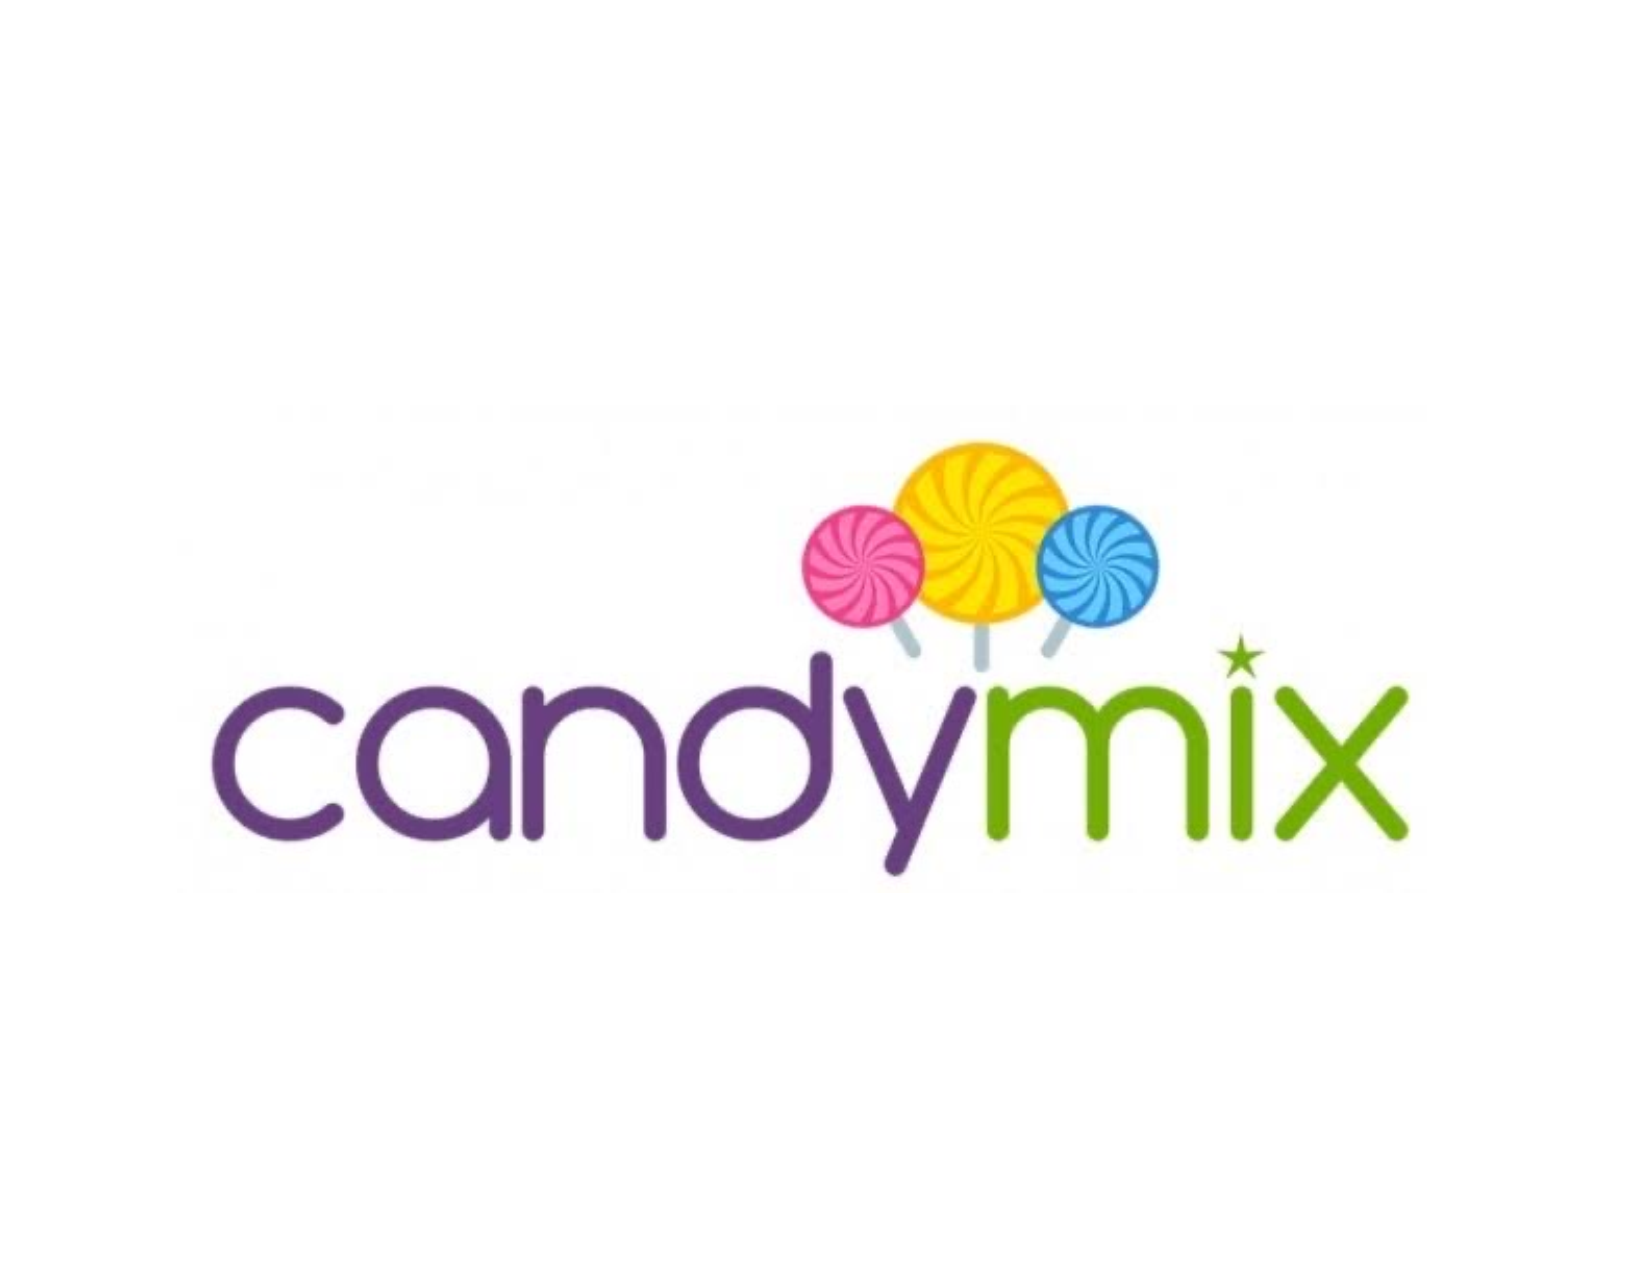 CANDY MIX